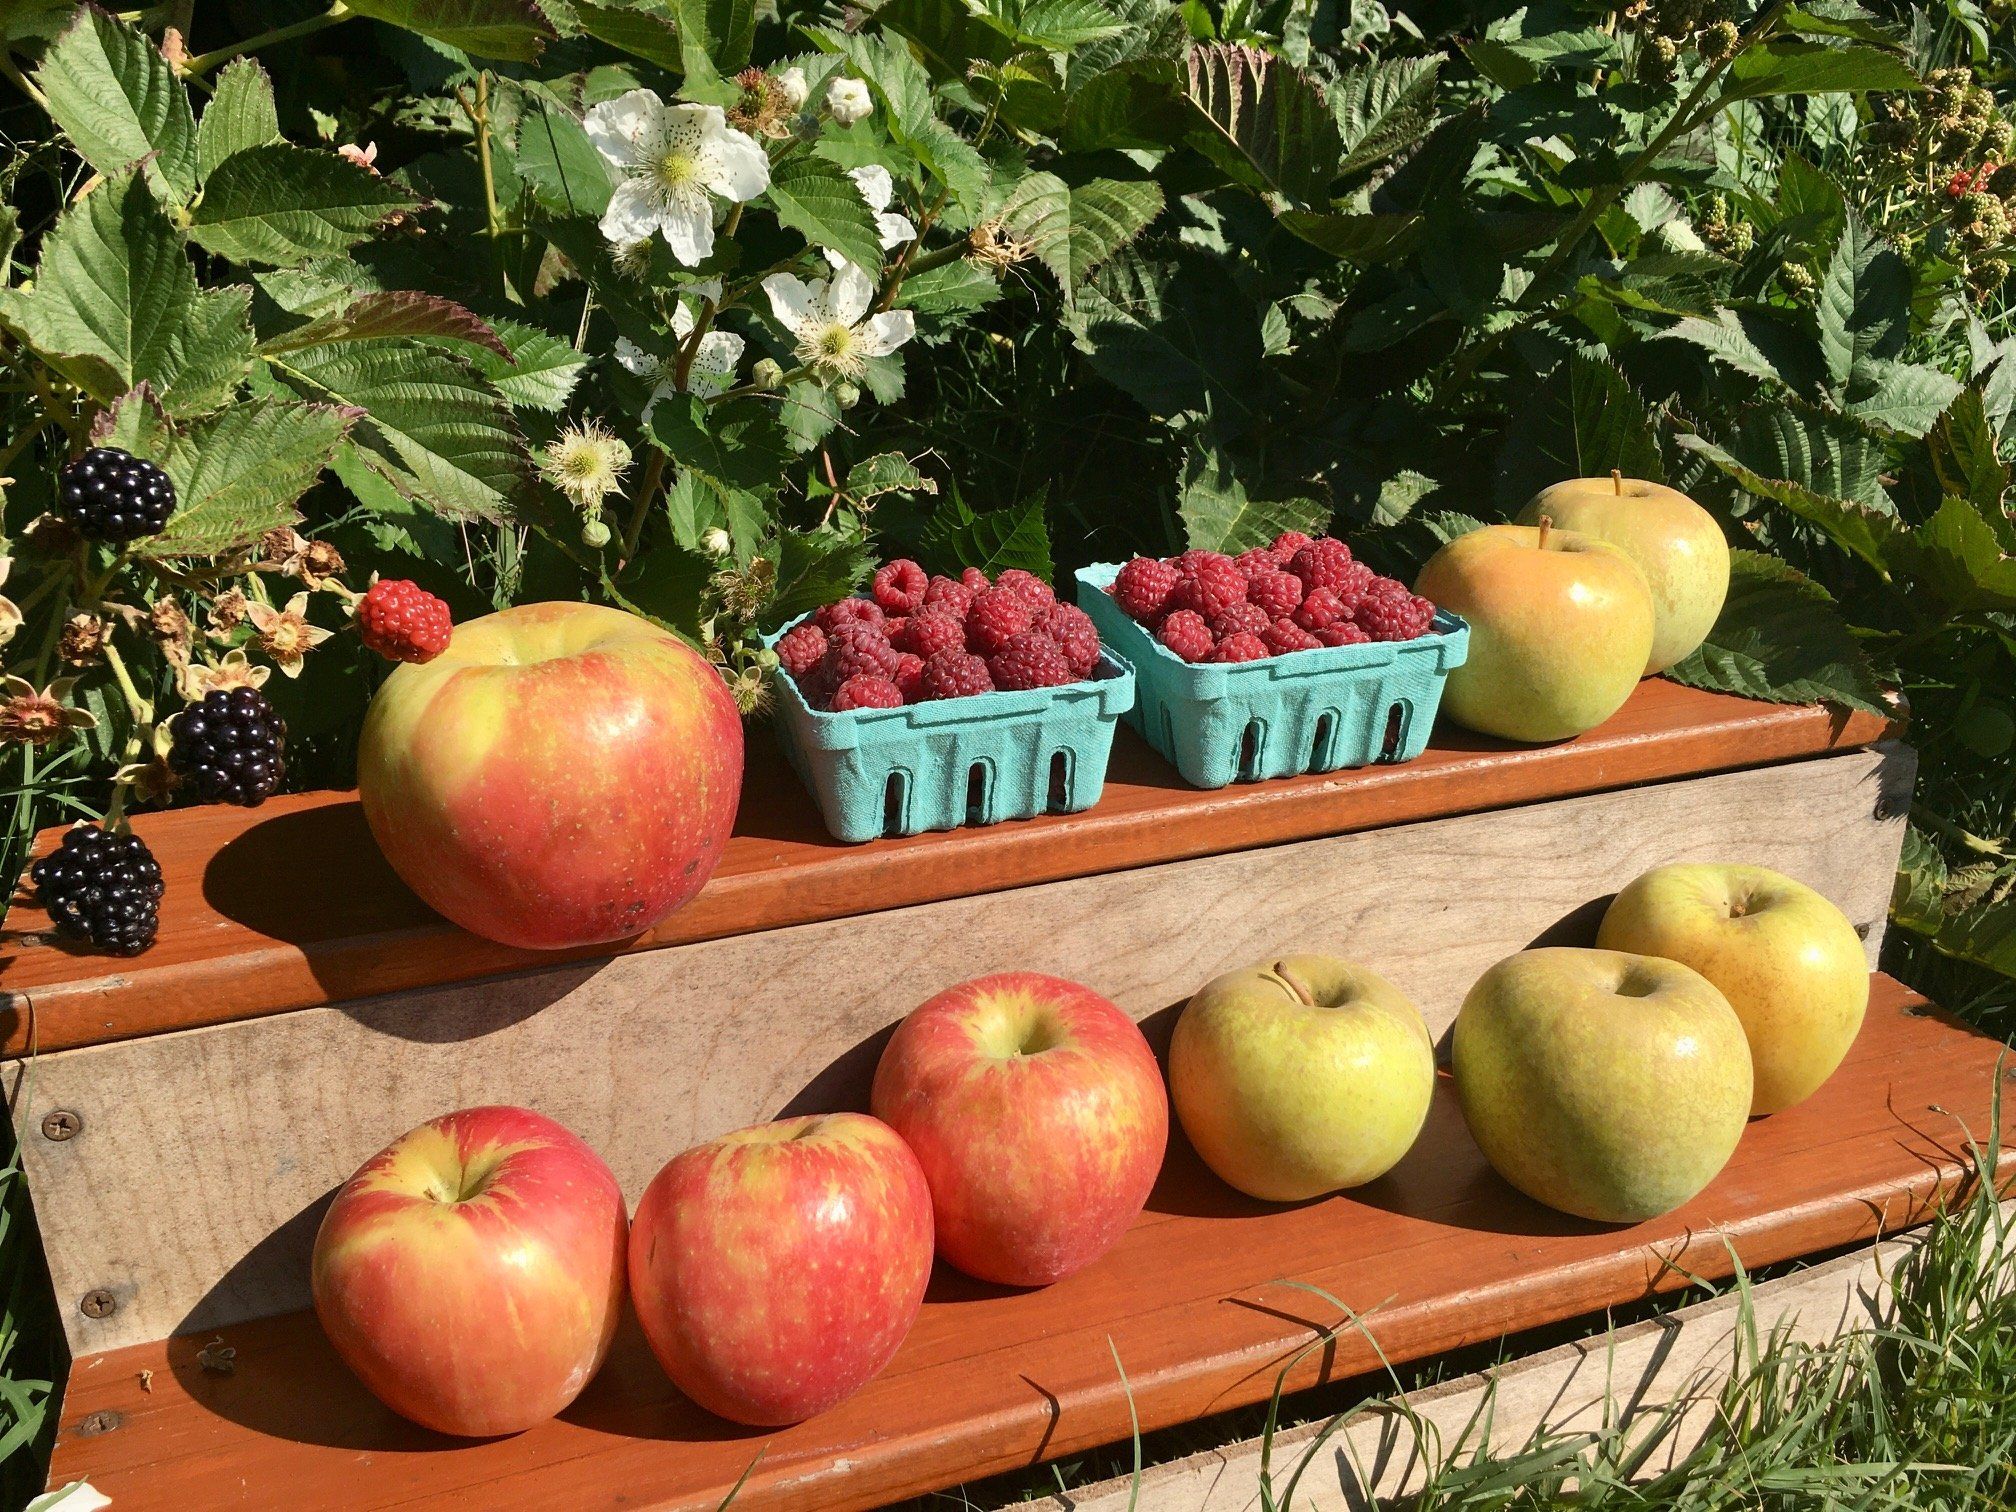 Previous Happening: Cool weather, autumn fruits, and starting to think about our Winter CSA...